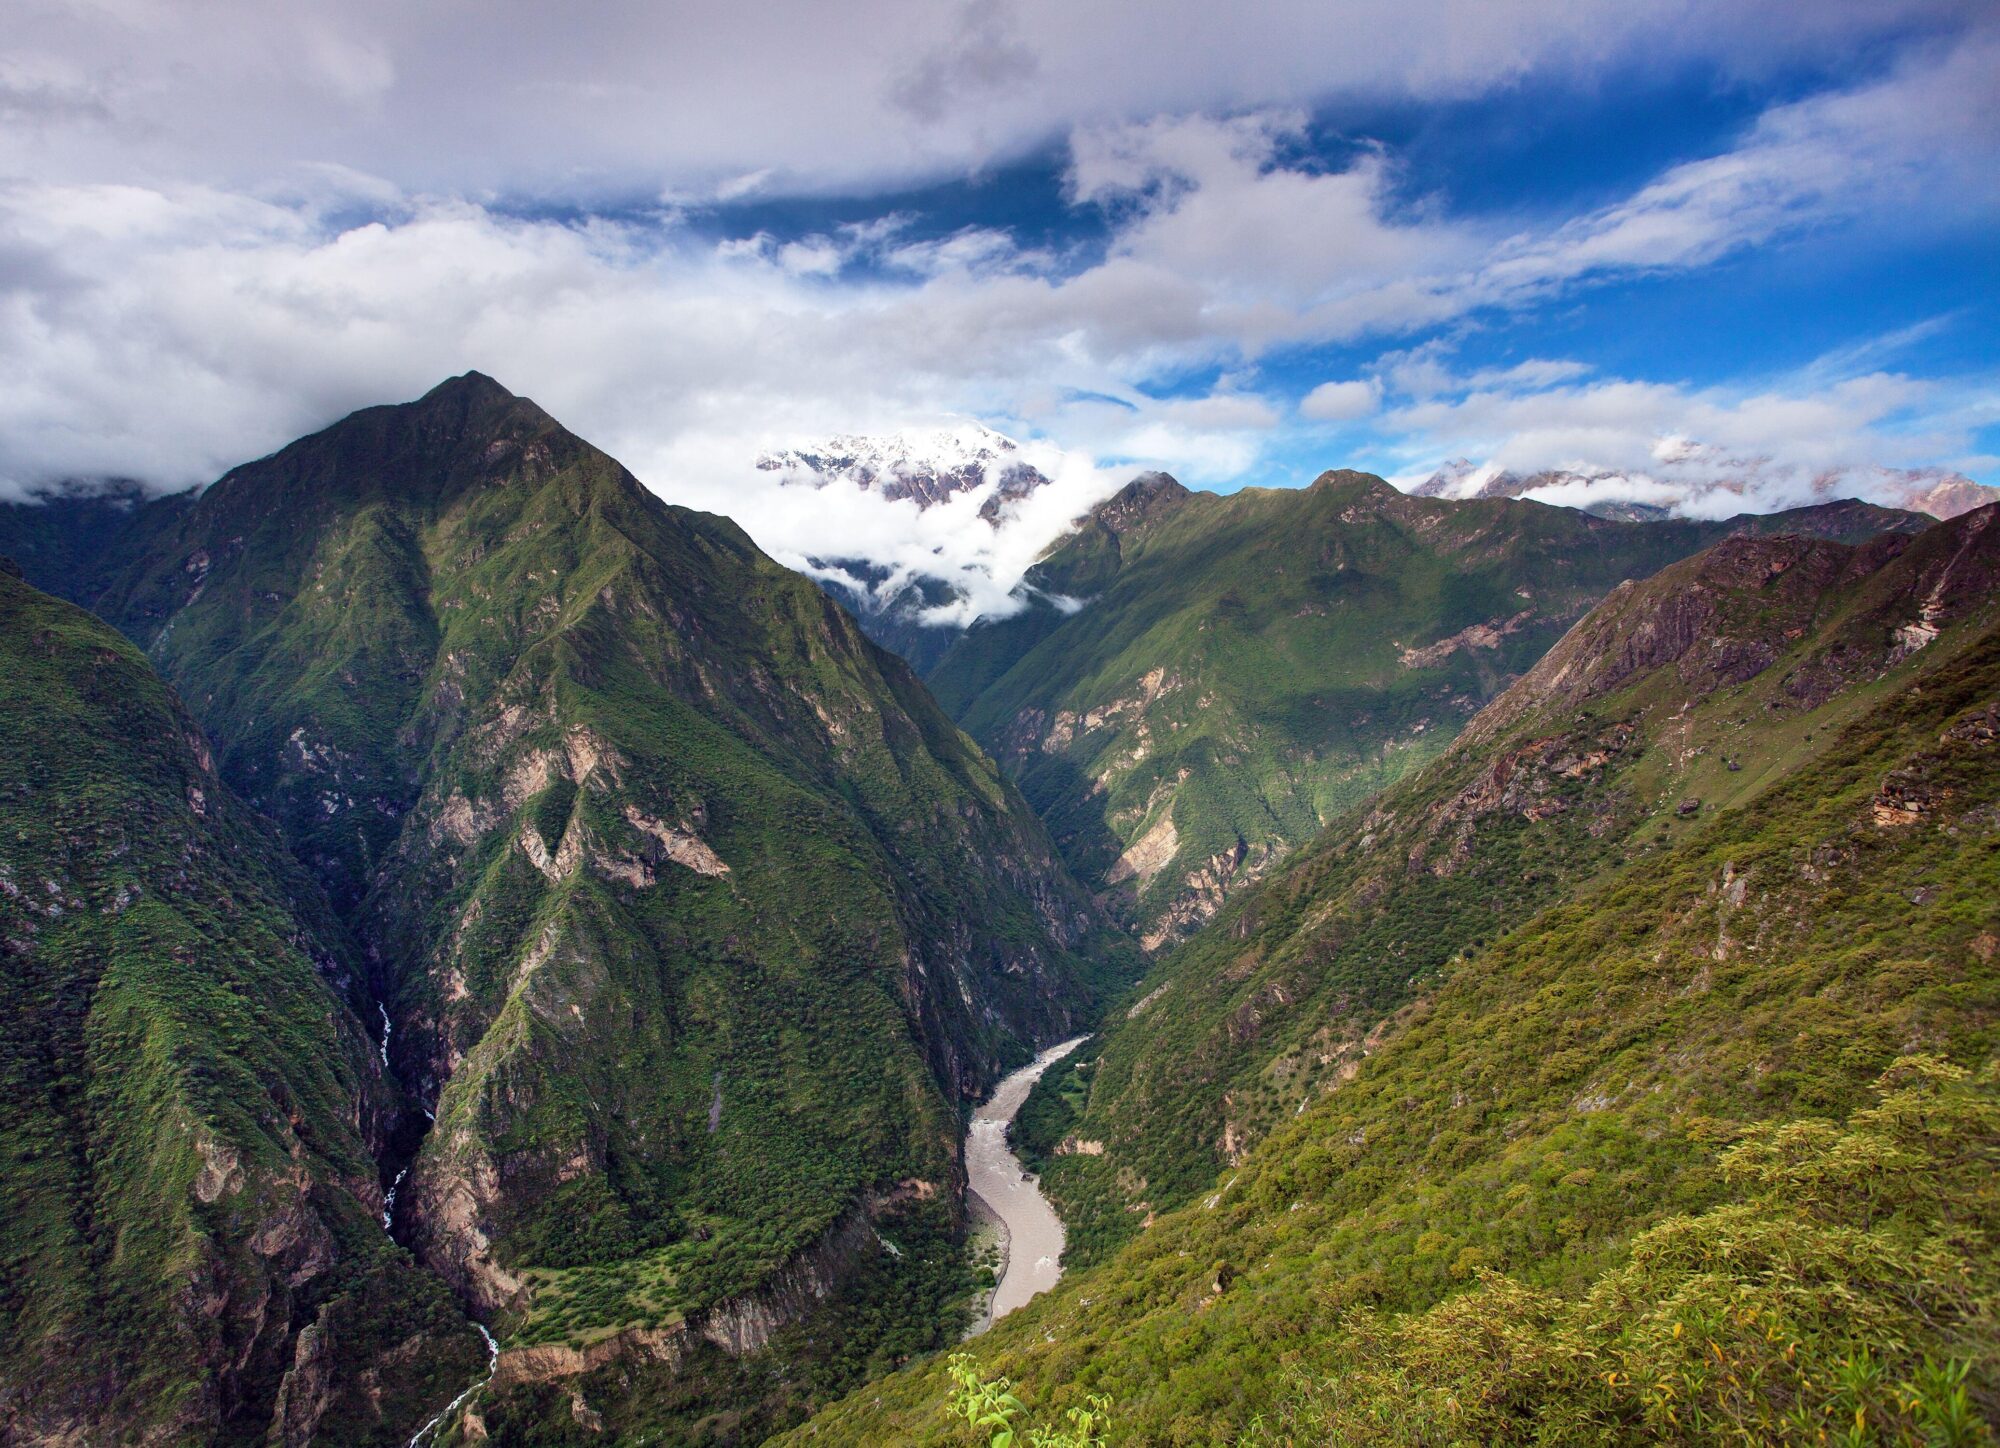 <p>The Apurimac River in Perú, the farthermost source of the Amazon River (image: Alamy)</p>